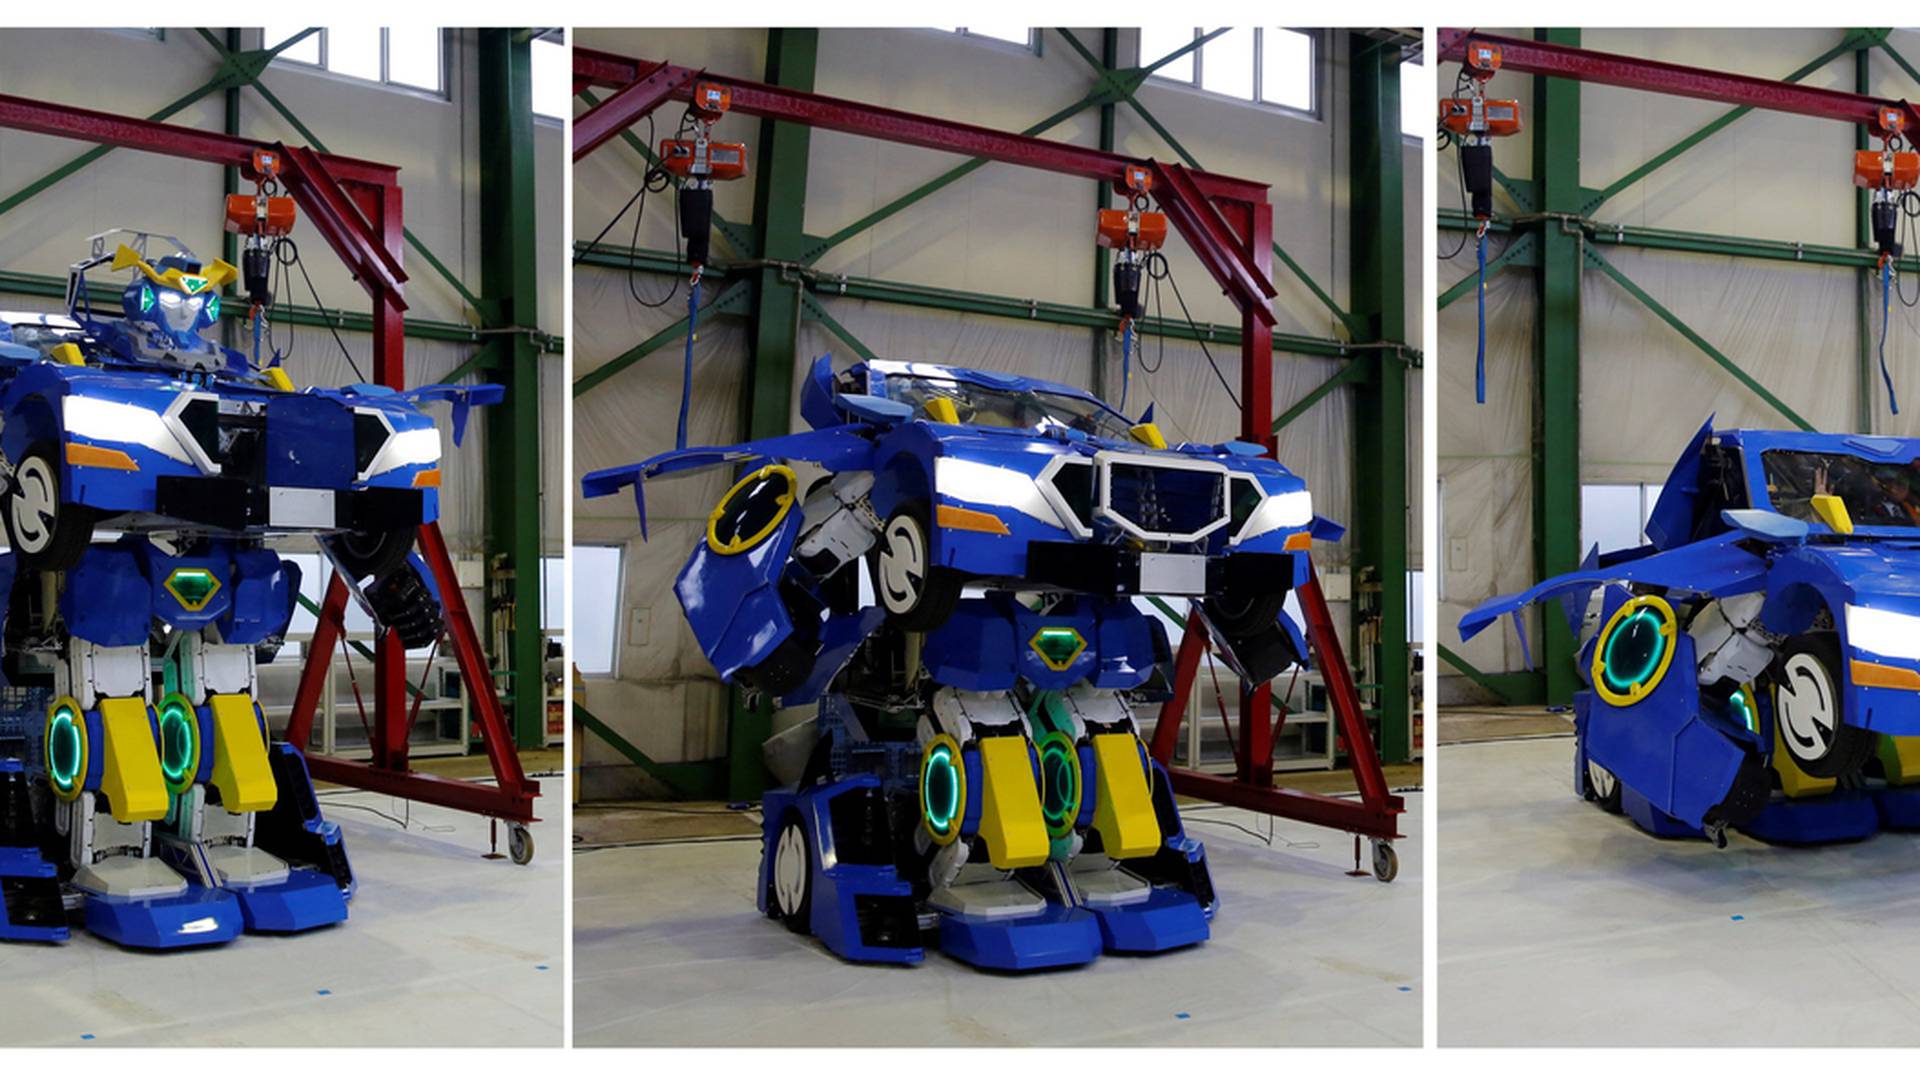 Combination picture shows a new transforming robot called "J-deite RIDE" that transforms itself into a passenger vehicle, developed by Brave Robotics Inc, Asratec Corp and Sansei Technologies Inc, at a factory near Tokyo